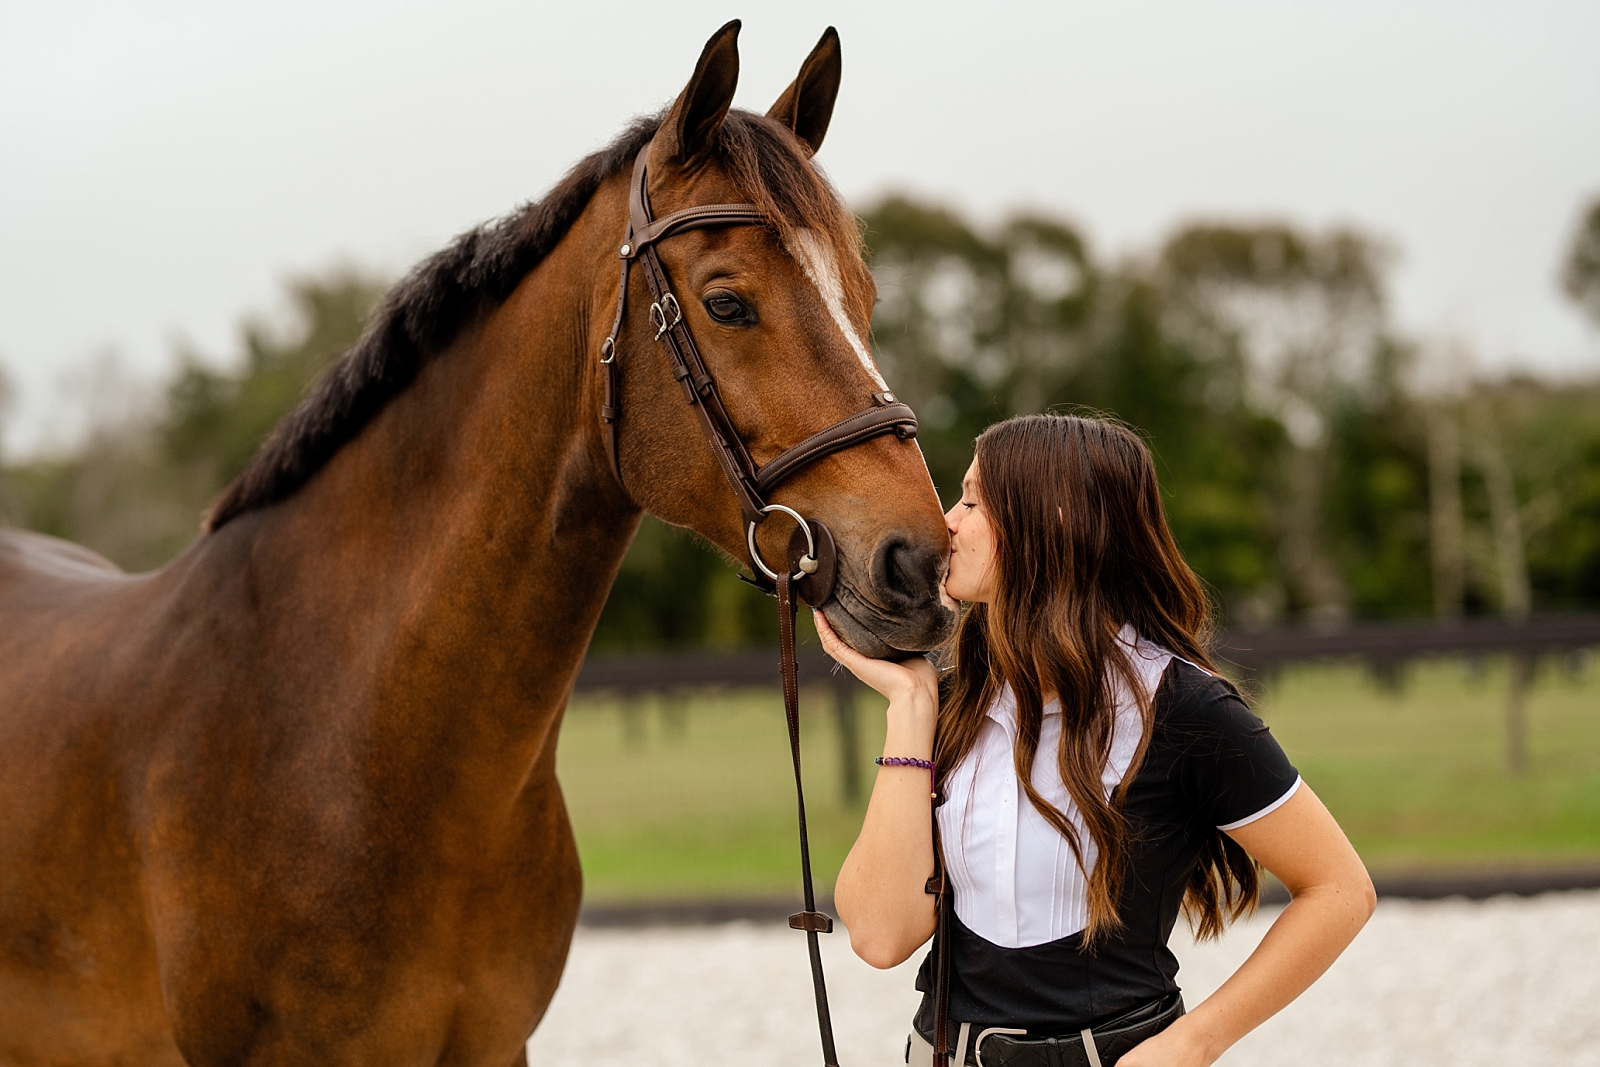 Senior pictures with horses. Ocala equestrian photography. Horse and rider. Jumper horse. Girl with her horse. Horse and rider posing ideas.